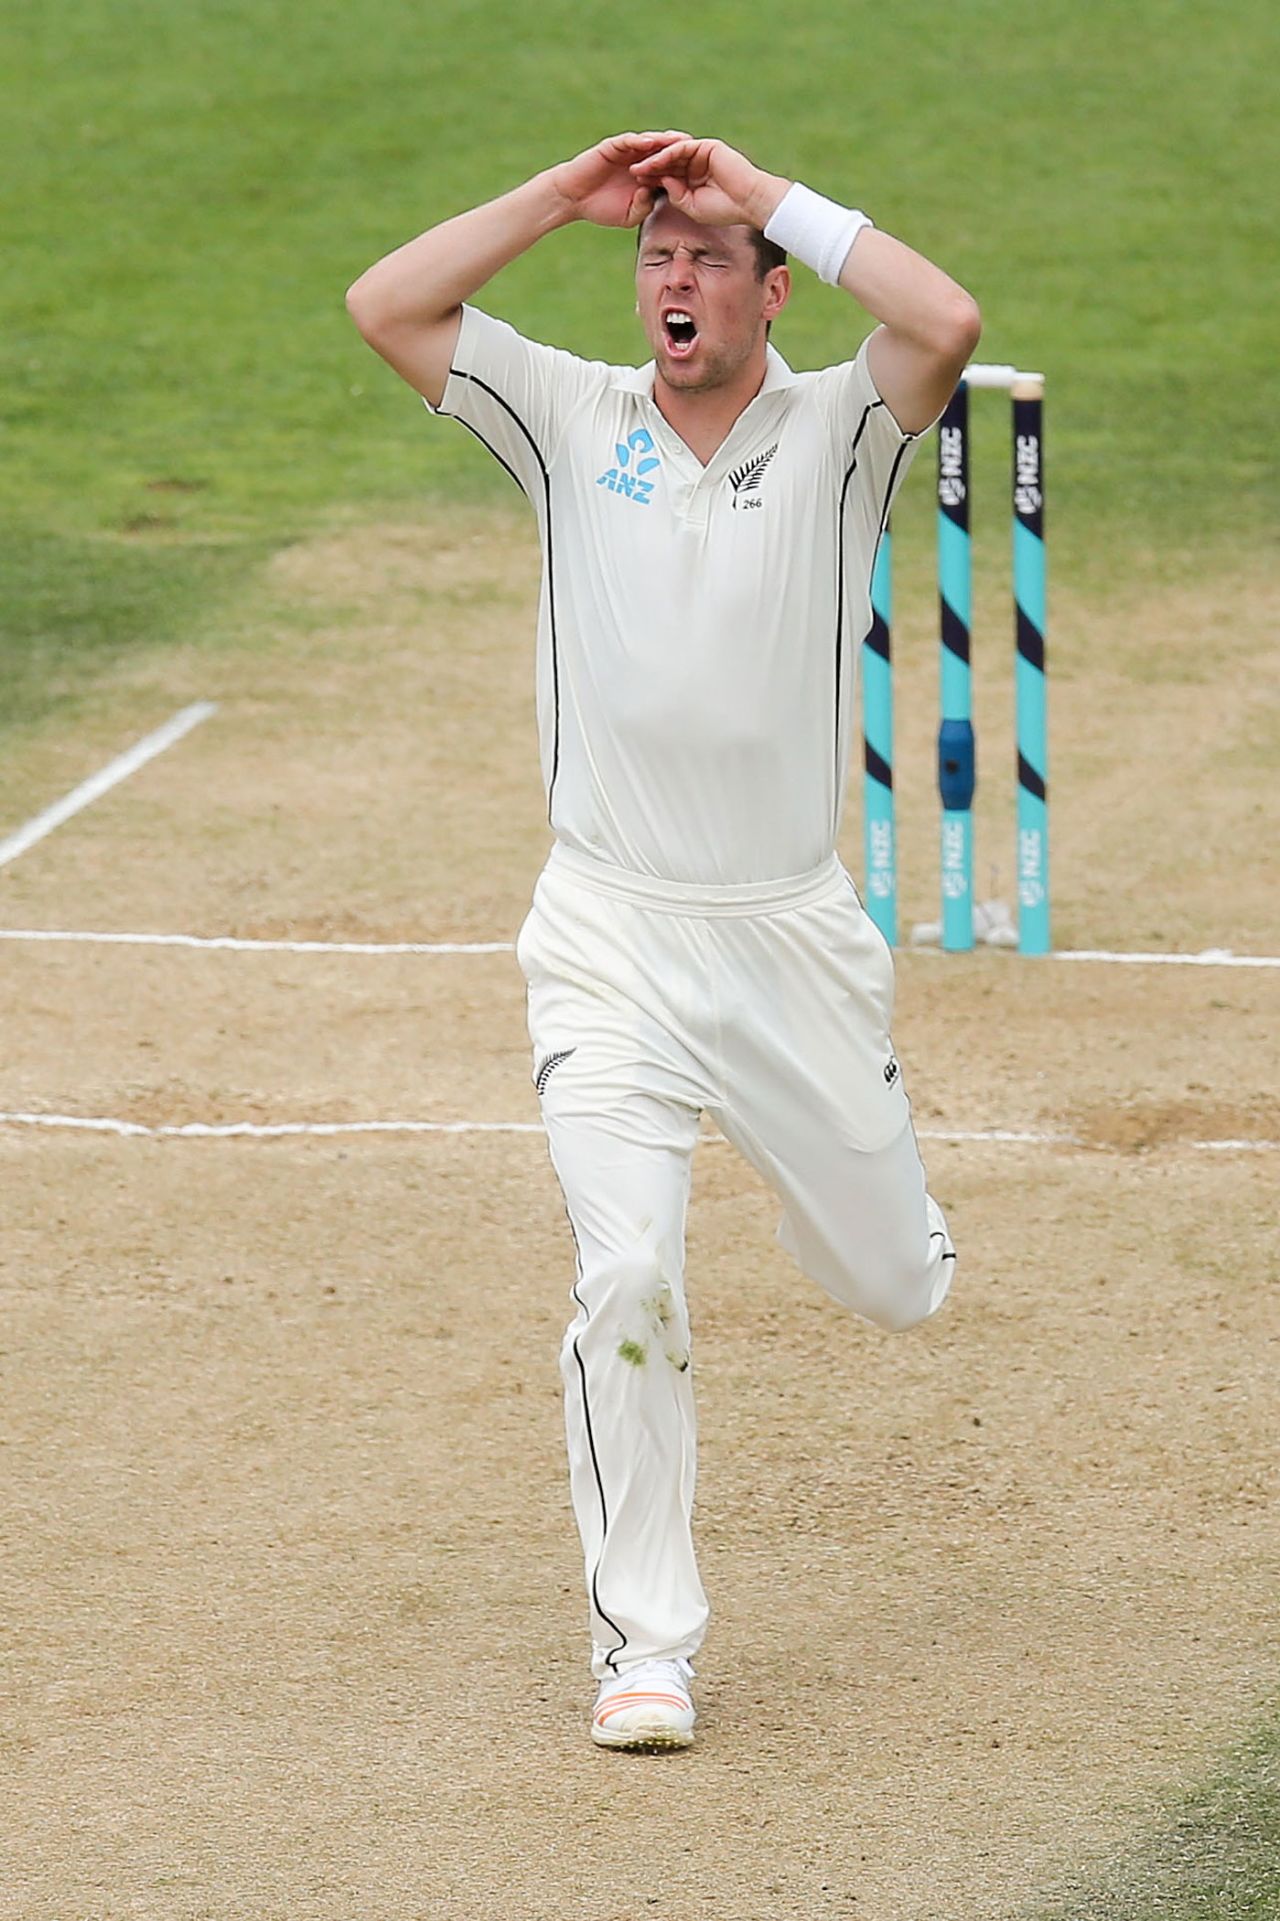 Matt Henry reacts to a close call, New Zealand v West Indies, 1st Test, Wellington, 4th day, December 4, 2017